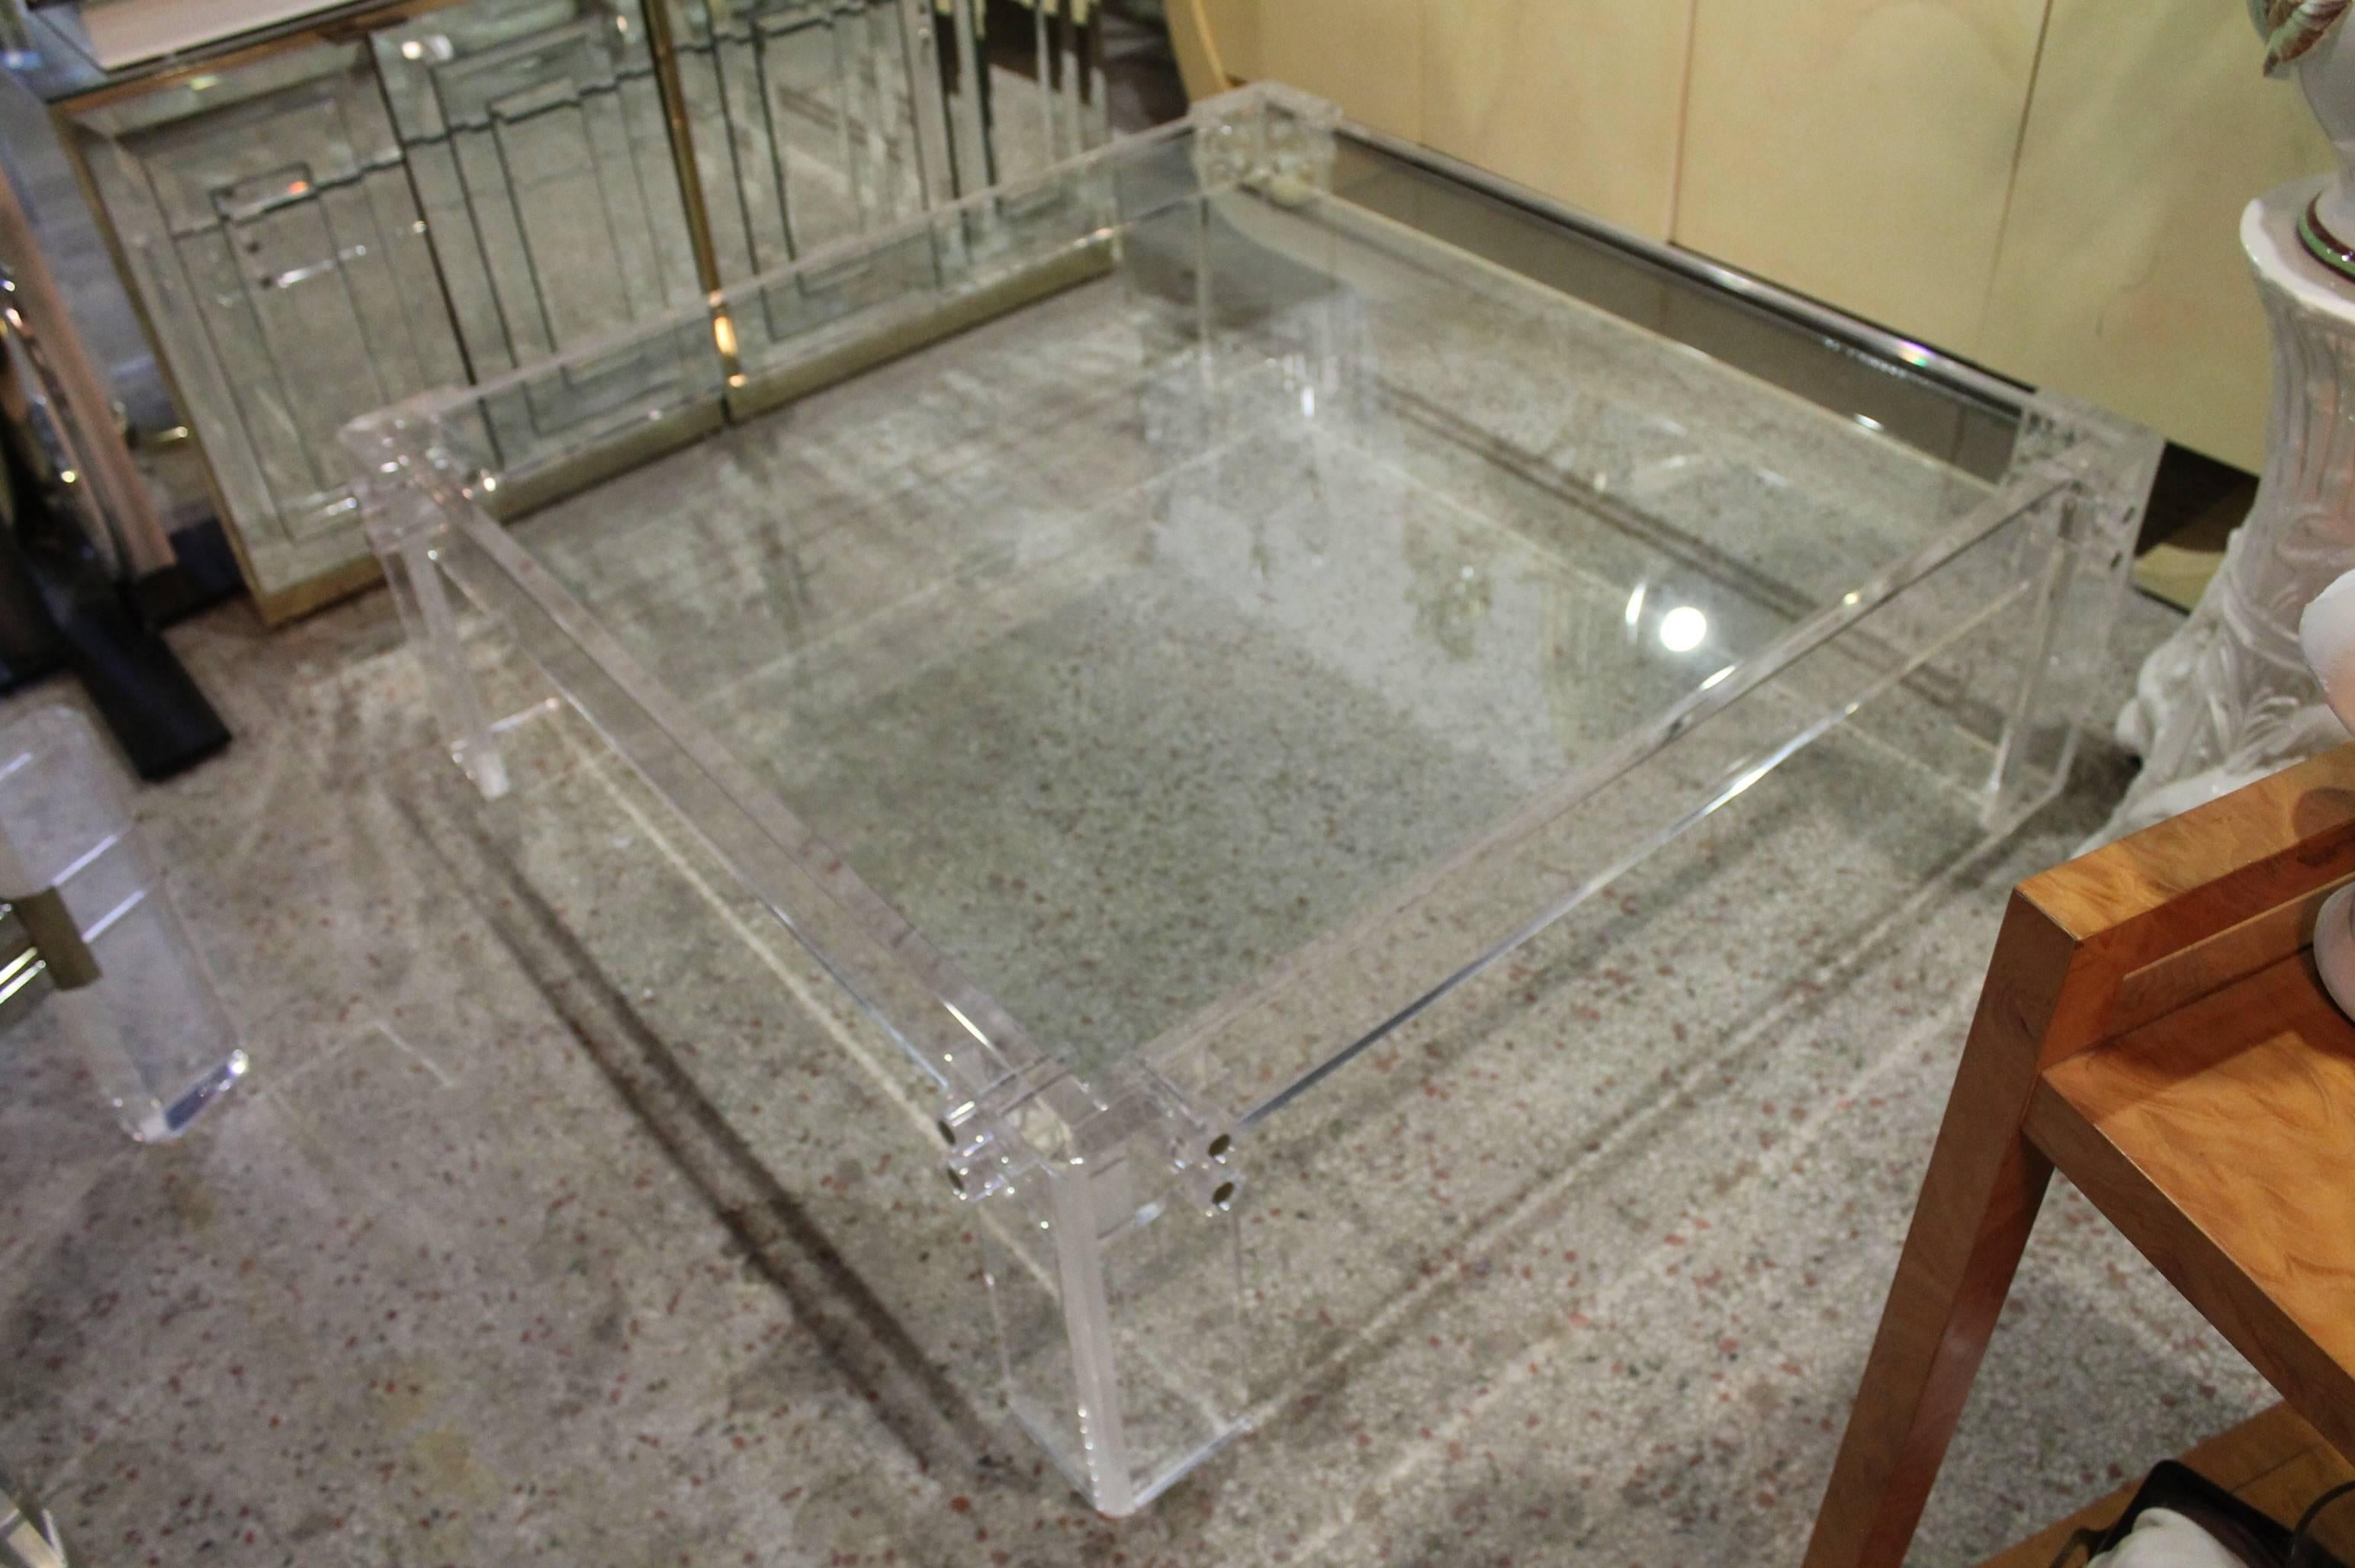 Large square Lucite coffee table with Lucite and chrome pegs. Glass top. Overall size given. Glass top only measures 42 x 42.